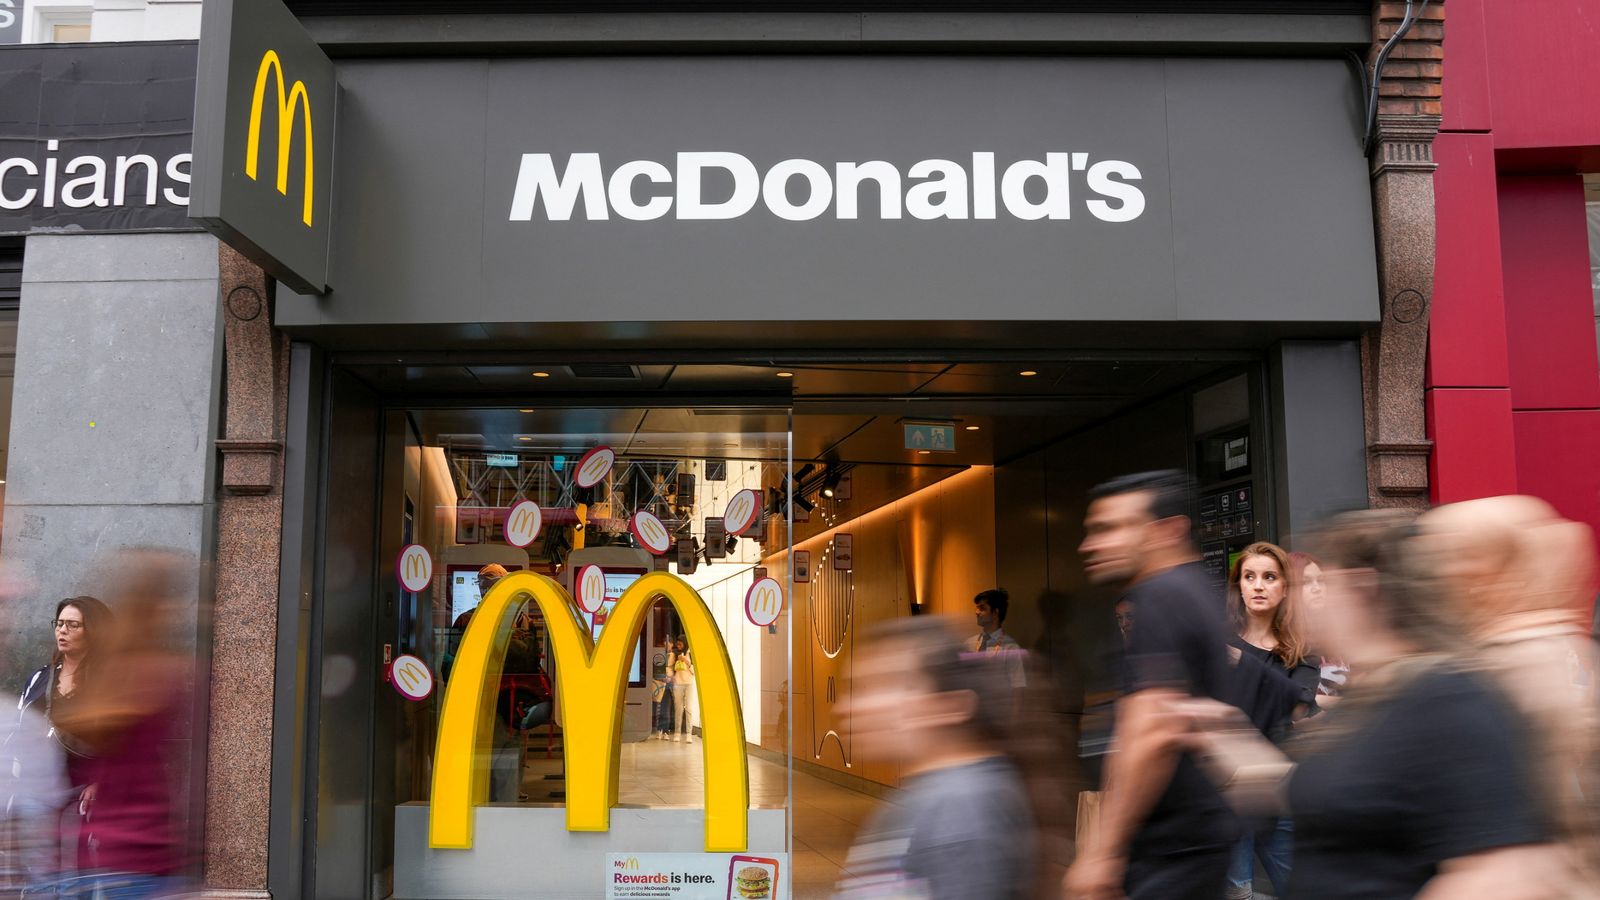 McDonald's apologises after IT outage shuts restaurants worldwide but rules out cybersecurity attack